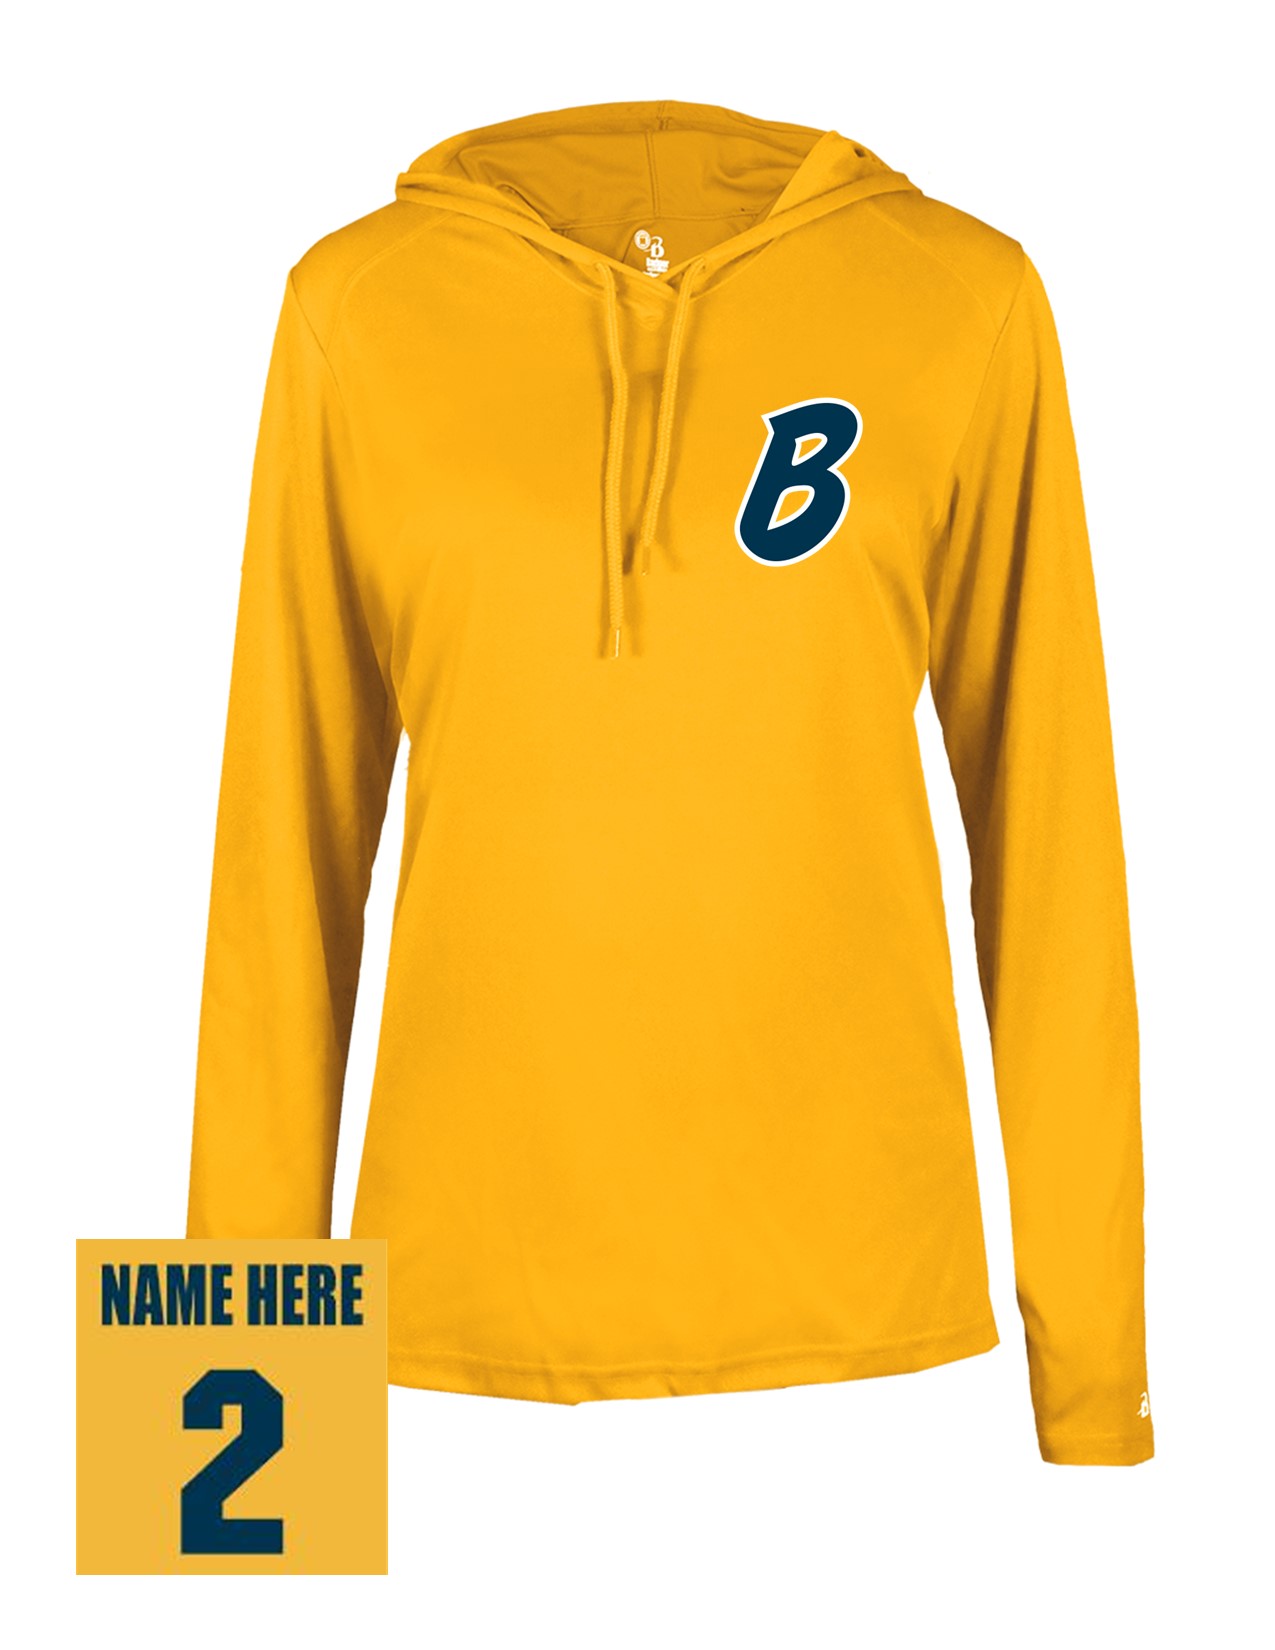 77b Badger 4165 Womens B-Core Performance 100% Poly Wicking Hooded Tee with Bombers "B" LC Logo